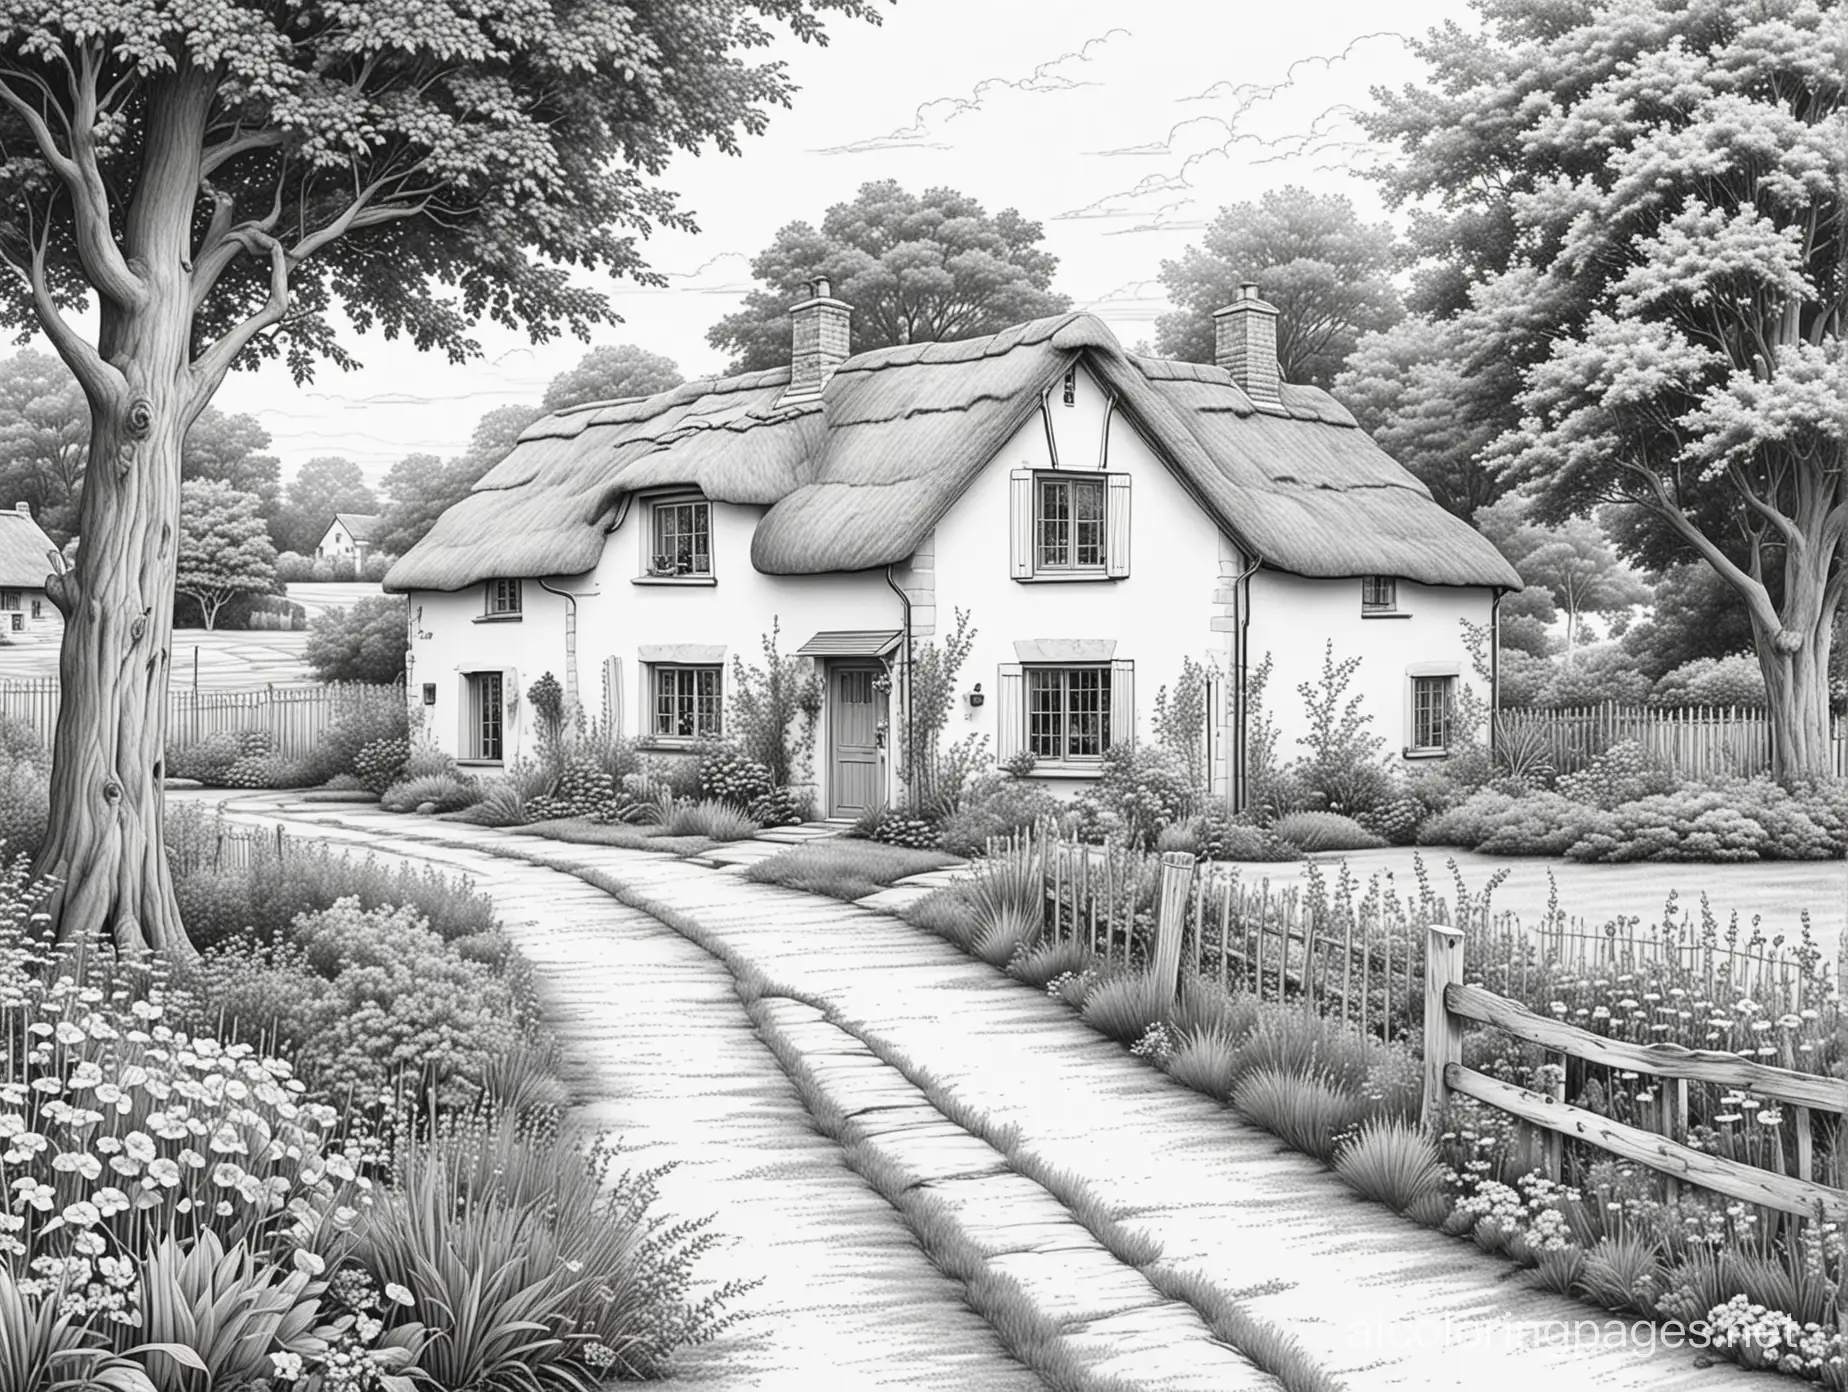 realistic landscape, rural English cottage, , Coloring Page, black and white, line art, white background, Simplicity, Ample White Space. The background of the coloring page is plain white to make it easy for young children to color within the lines. The outlines of all the subjects are easy to distinguish, making it simple for kids to color without too much difficulty